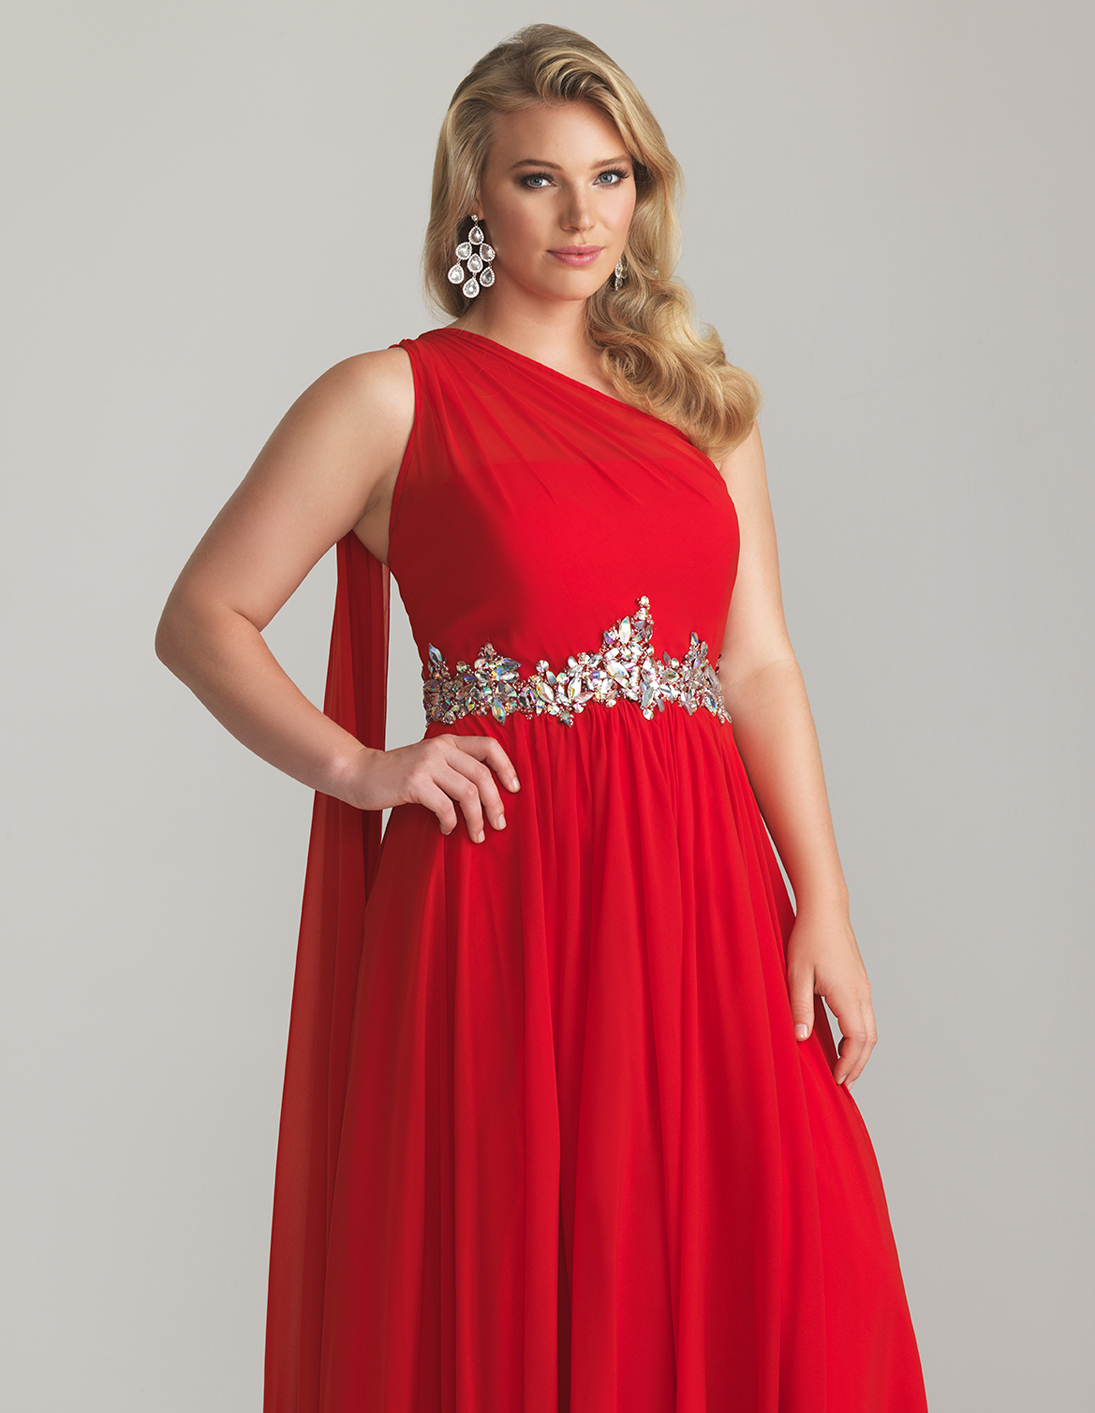 Women S Evening Dresses - Page 51 of 503 - Young Plus Size Party ...